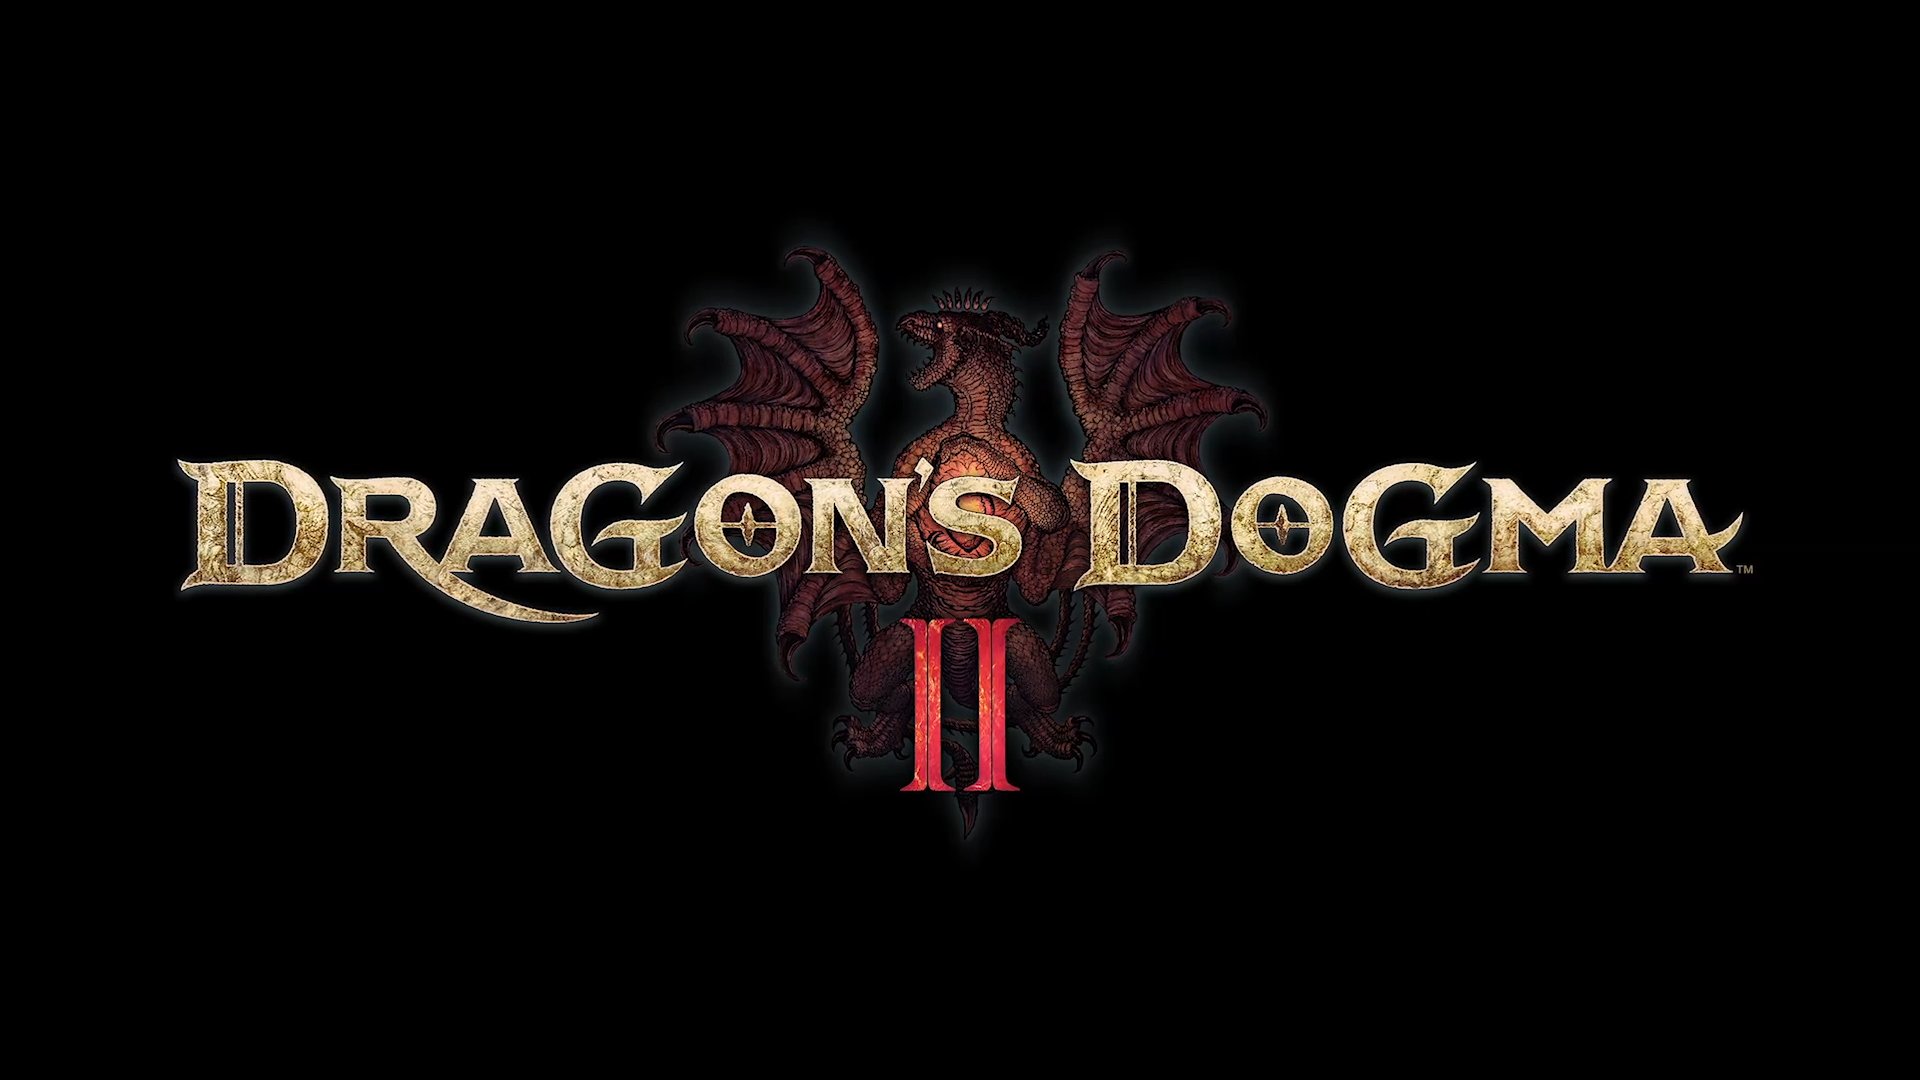 Dragon's Dogma 2: release date speculation, trailers, gameplay, and more